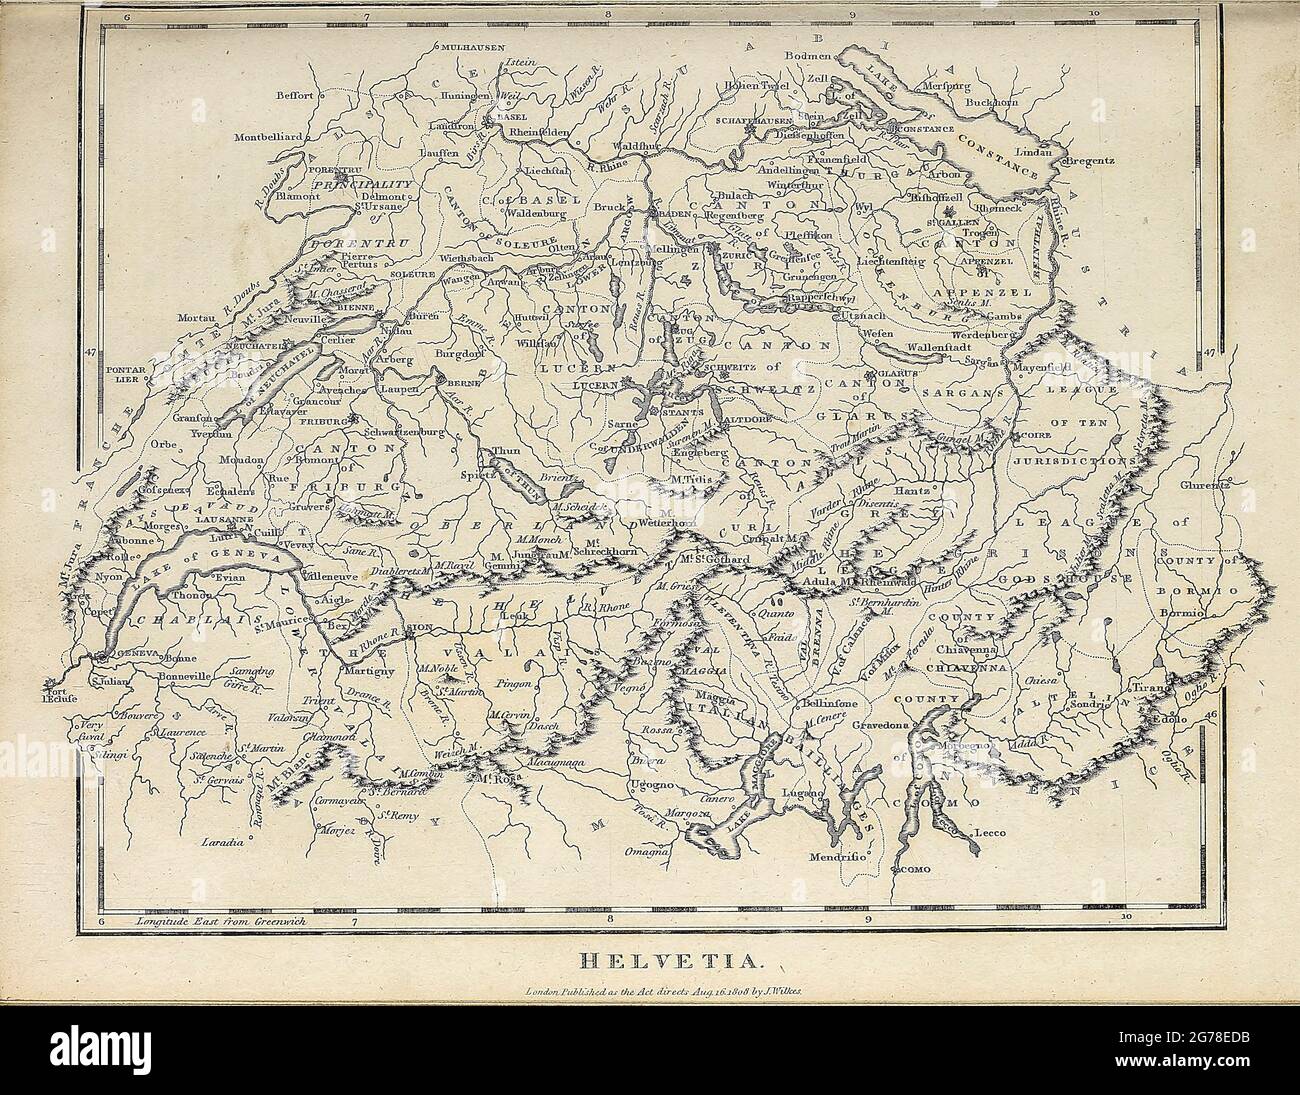 18th Century map of Helvetia (Switzerland) Copperplate engraving From the Encyclopaedia Londinensis or, Universal dictionary of arts, sciences, and literature; Volume IX;  Edited by Wilkes, John. Published in London in 1811 Stock Photo